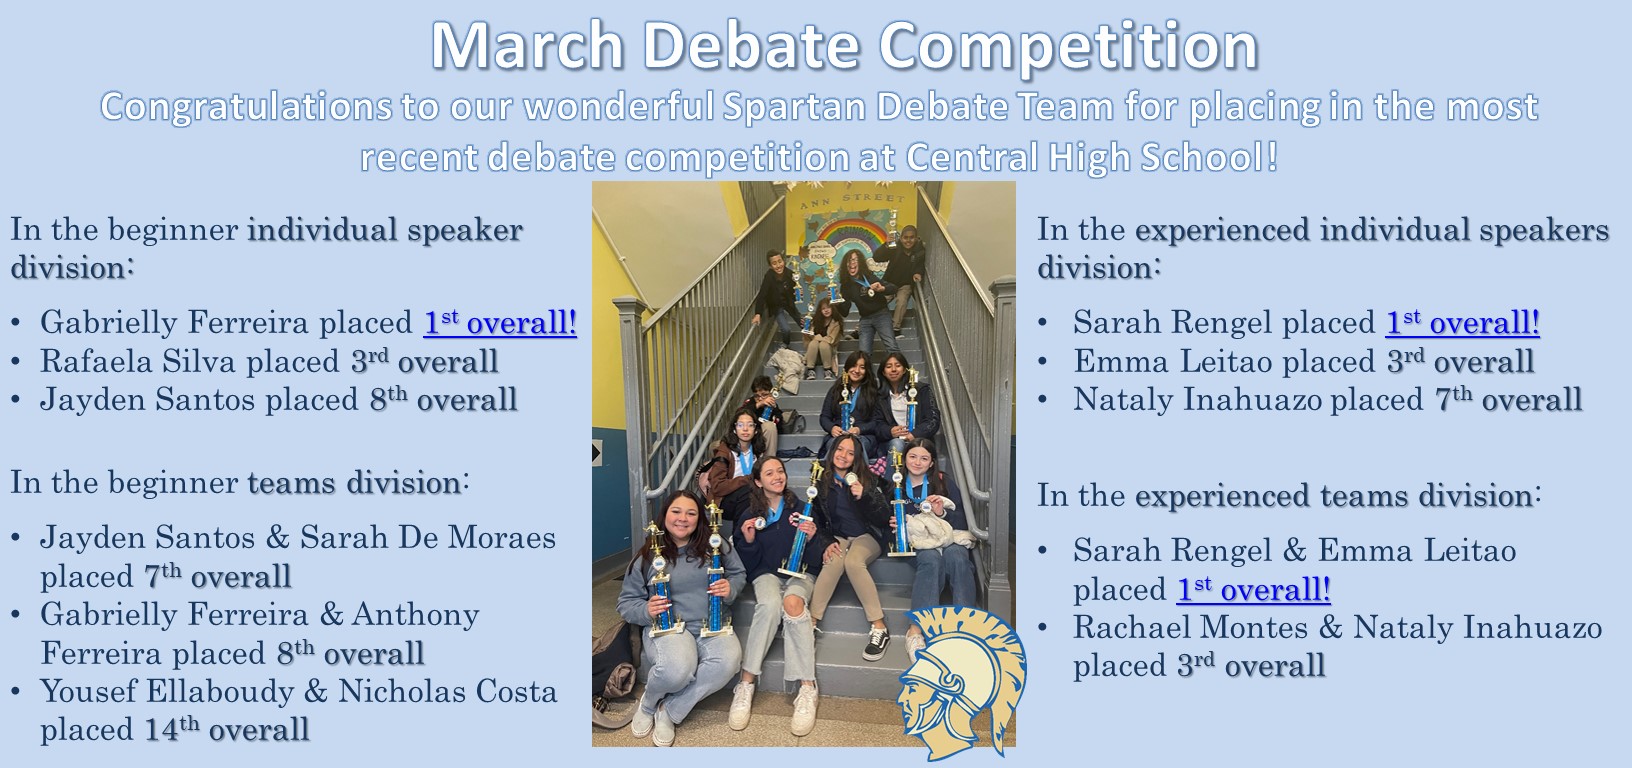 March Debate Competition Congratulations to our wonderful Spartan Debate Team for placing in the most recent debate competition at Central High School!  In the beginner individual speaker division:  Gabrielly Ferreira placed 1st overall! Rafaela Silva placed 3rd overall Jayden Santos placed 8th overall   In the beginner teams division:  Jayden Santos & Sarah De Moraes placed 7th overall Gabrielly Ferreira & Anthony Ferreira placed 8th overall Yousef Ellaboudy & Nicholas Costa placed 14th overall  In the experienced individual speakers division:  Sarah Rengel placed 1st overall! Emma Leitao placed 3rd overall Nataly Inahuazo placed 7th overall   In the experienced teams division:  Sarah Rengel & Emma Leitao placed 1st overall! Rachael Montes & Nataly Inahuazo placed 3rd overall  